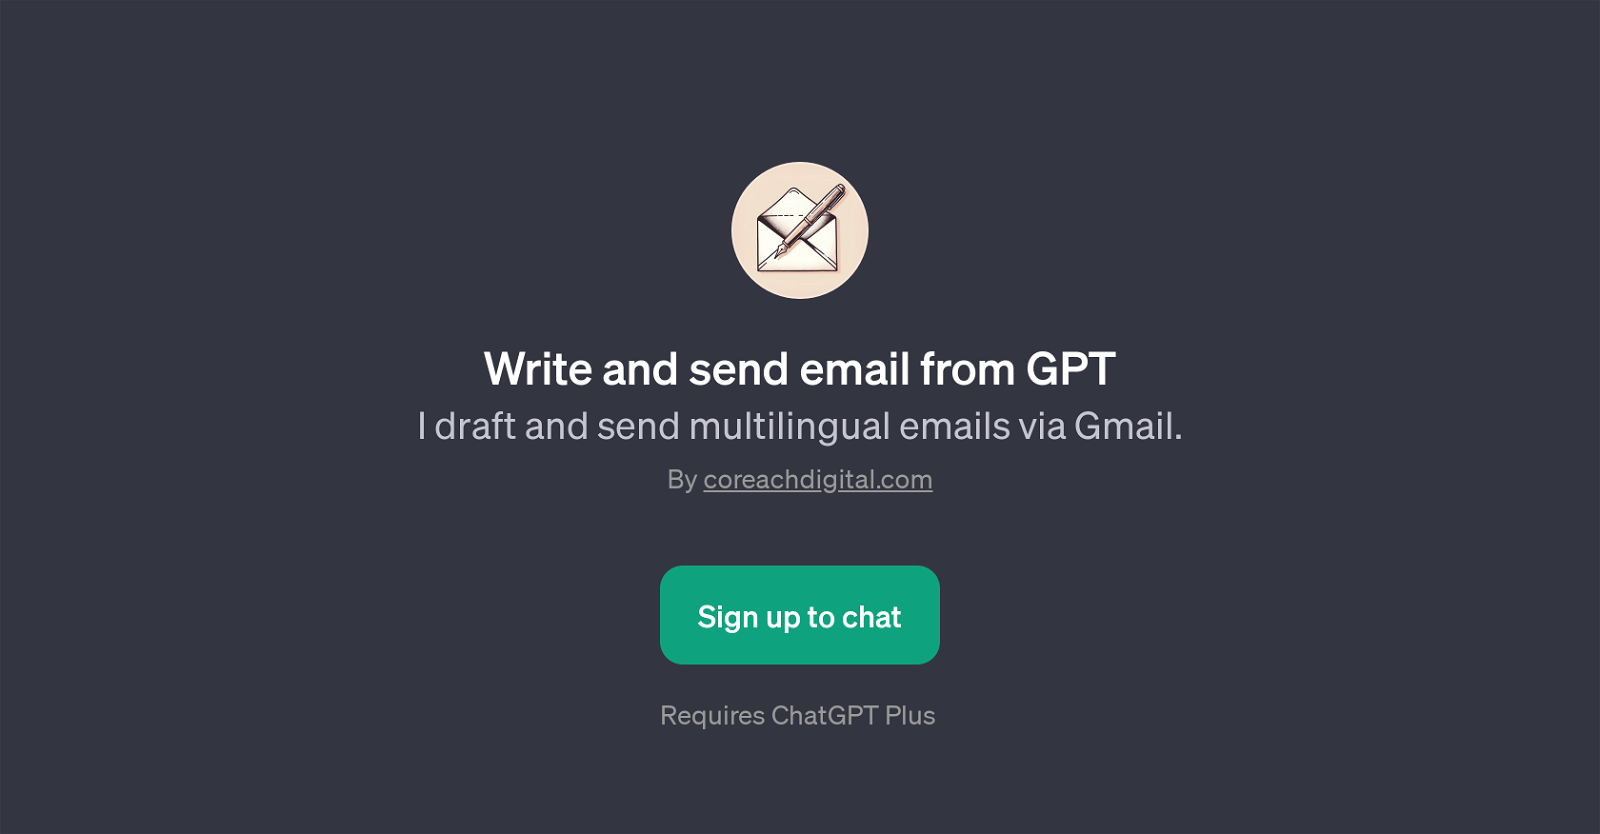 Write and send email from GPT website